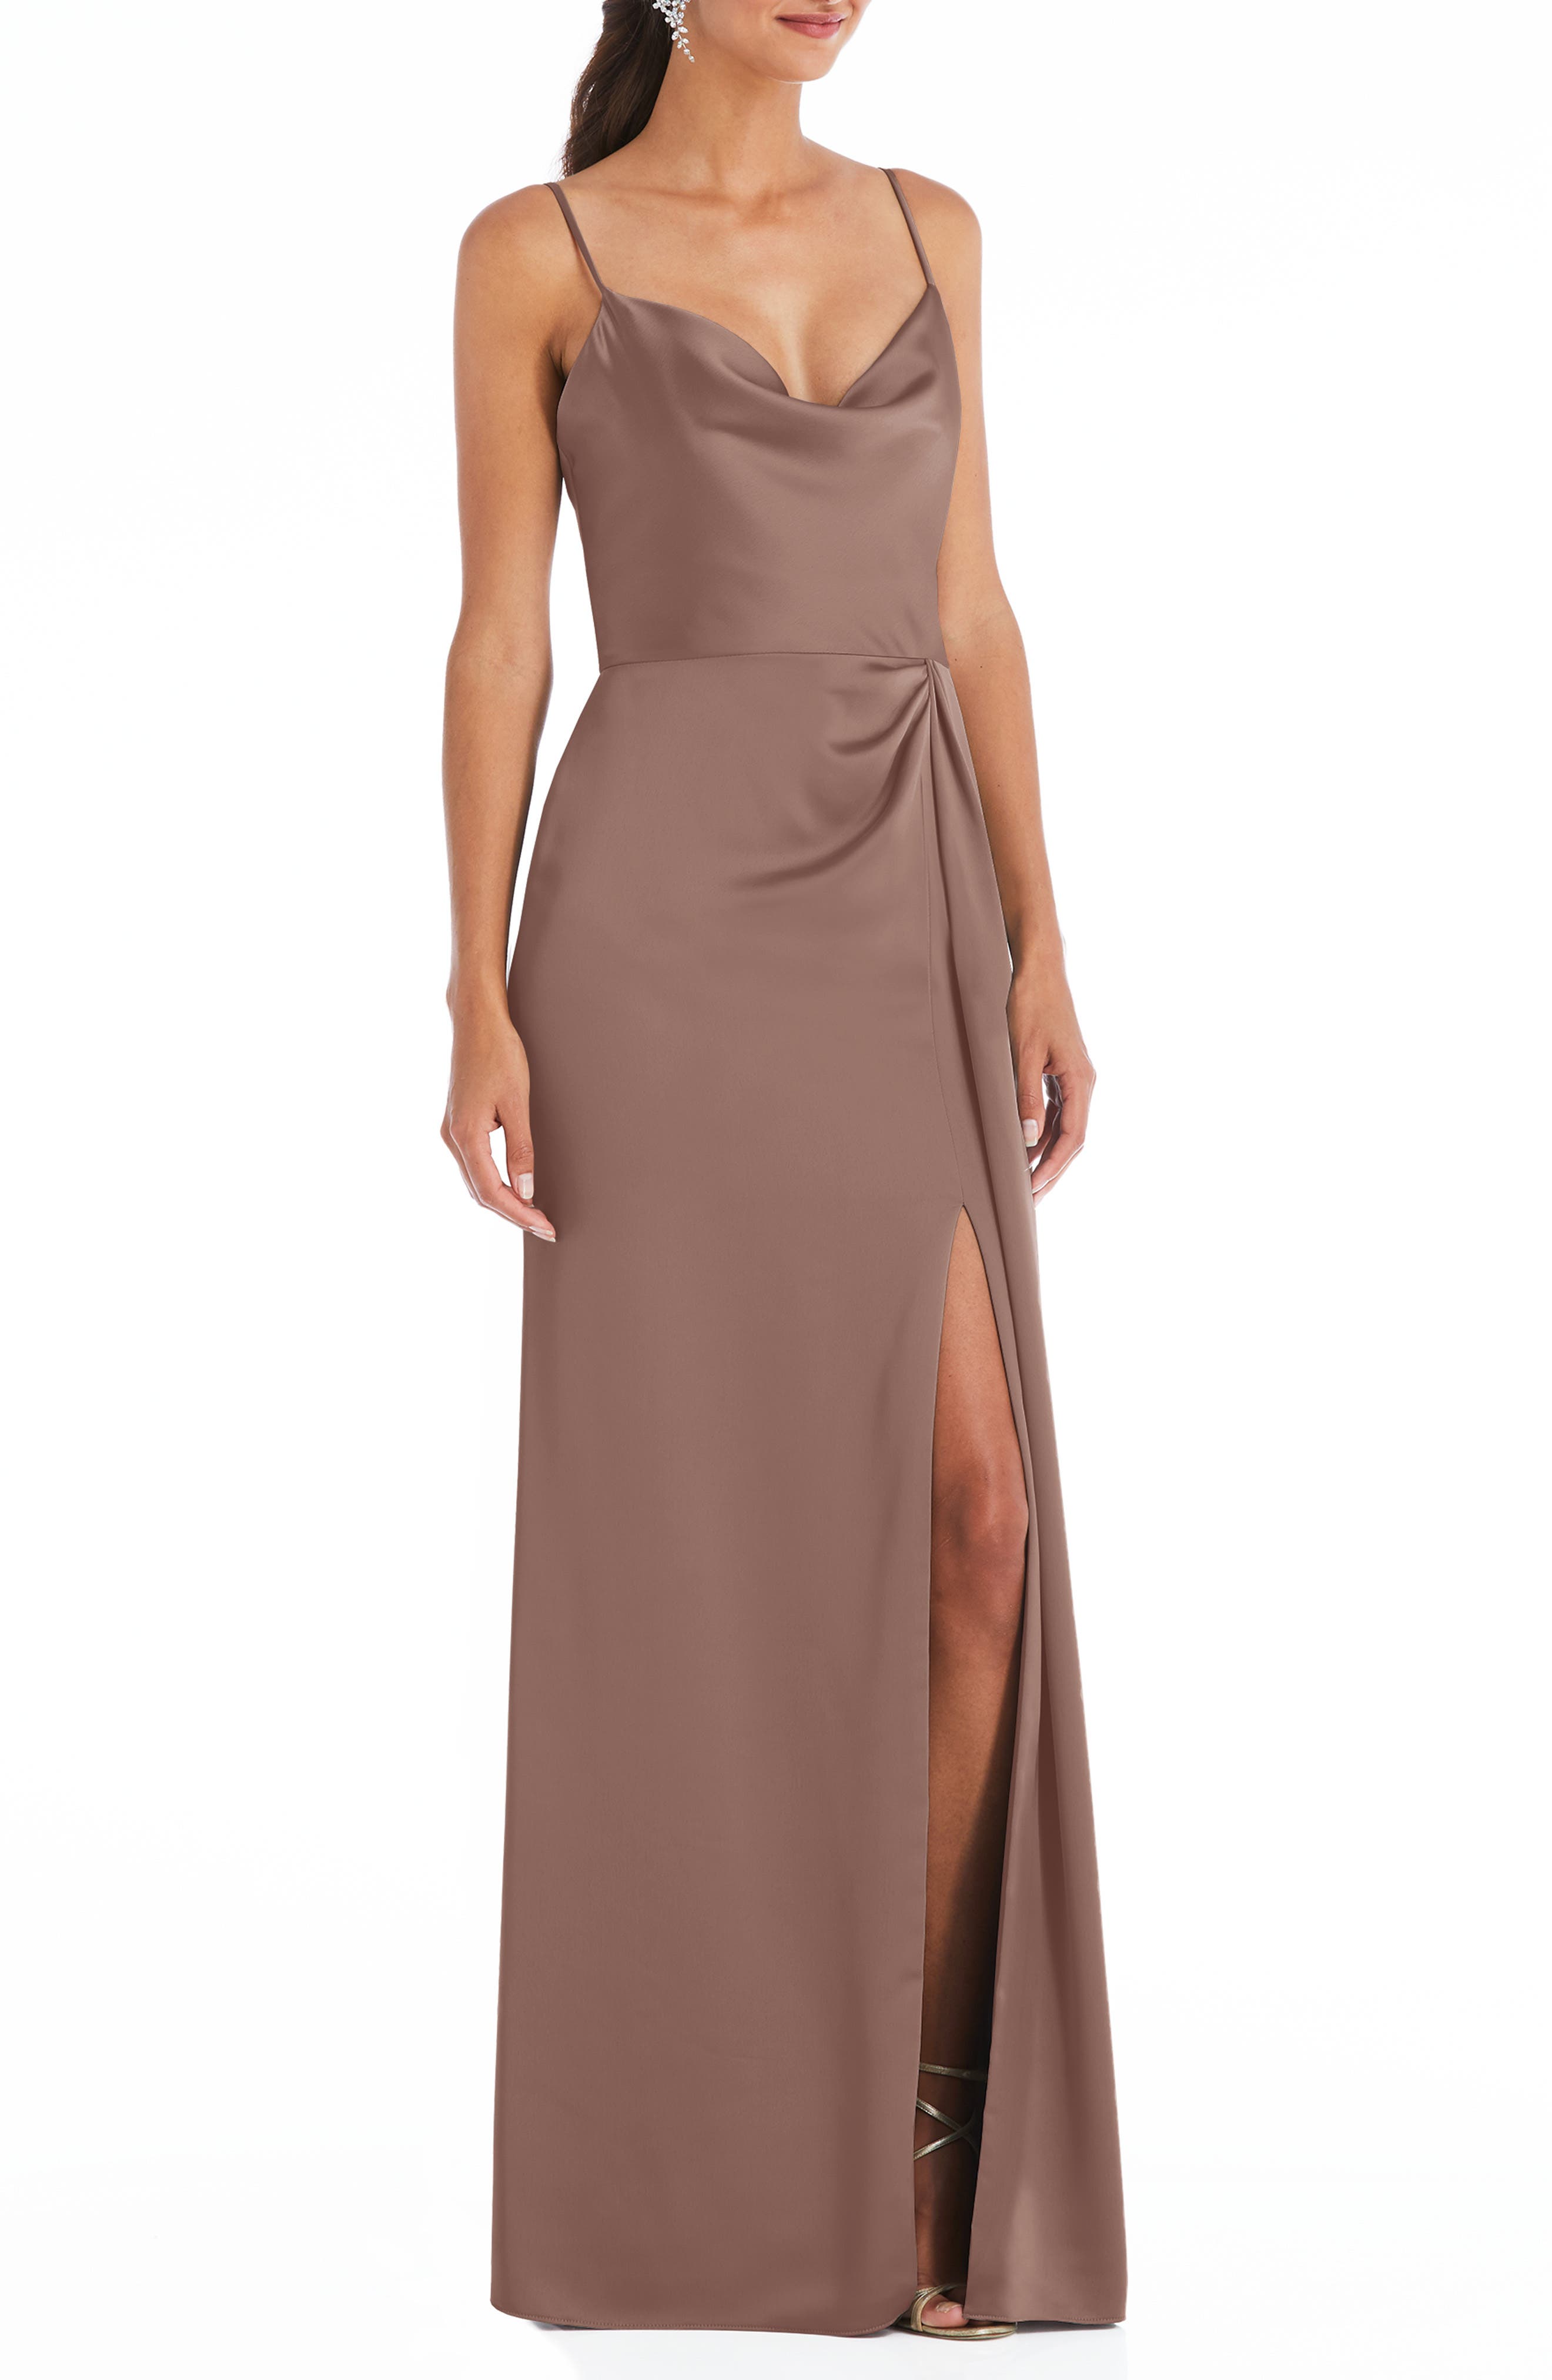 Brown Formal Dresses ☀ Evening Gowns ...